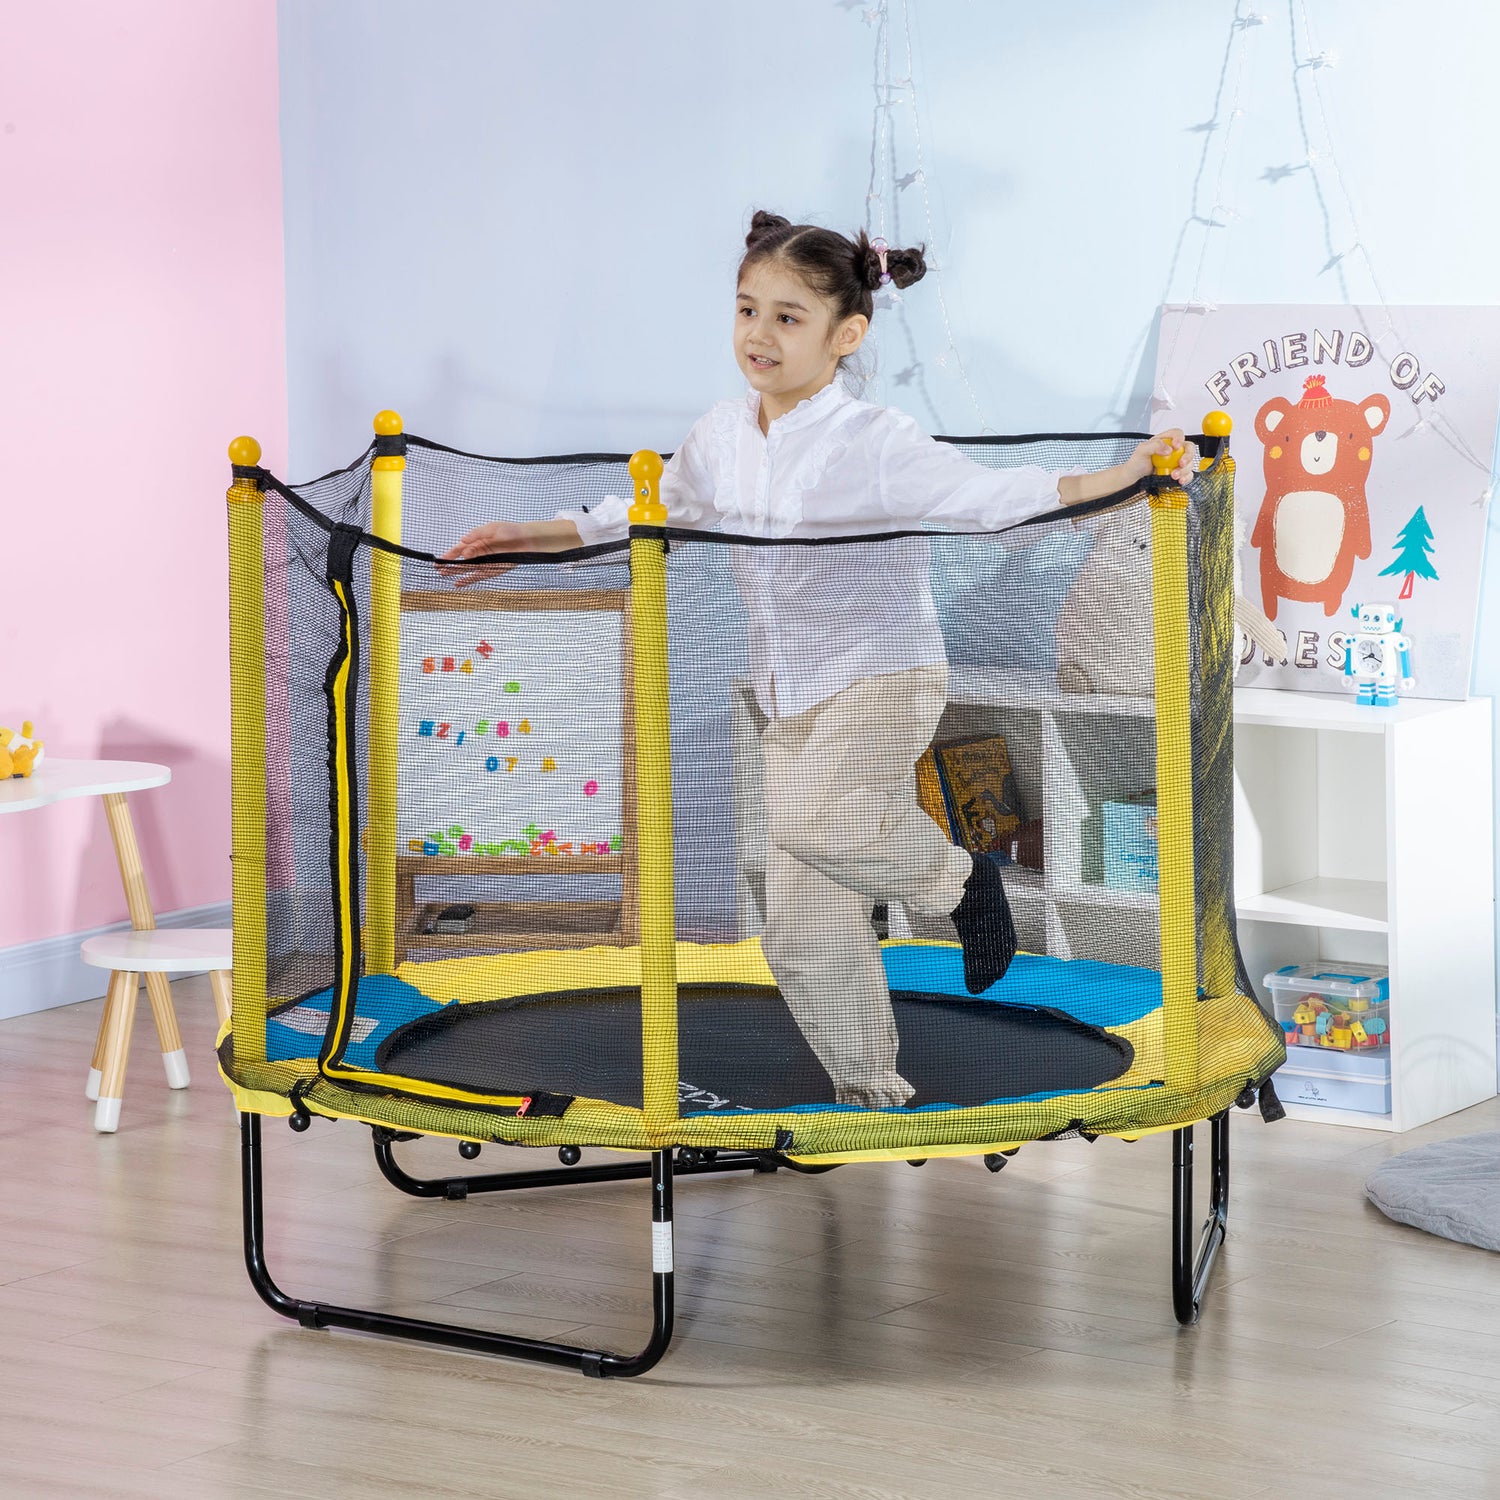 140cm Indoor Trampoline Installation With Protective Net Ideal For